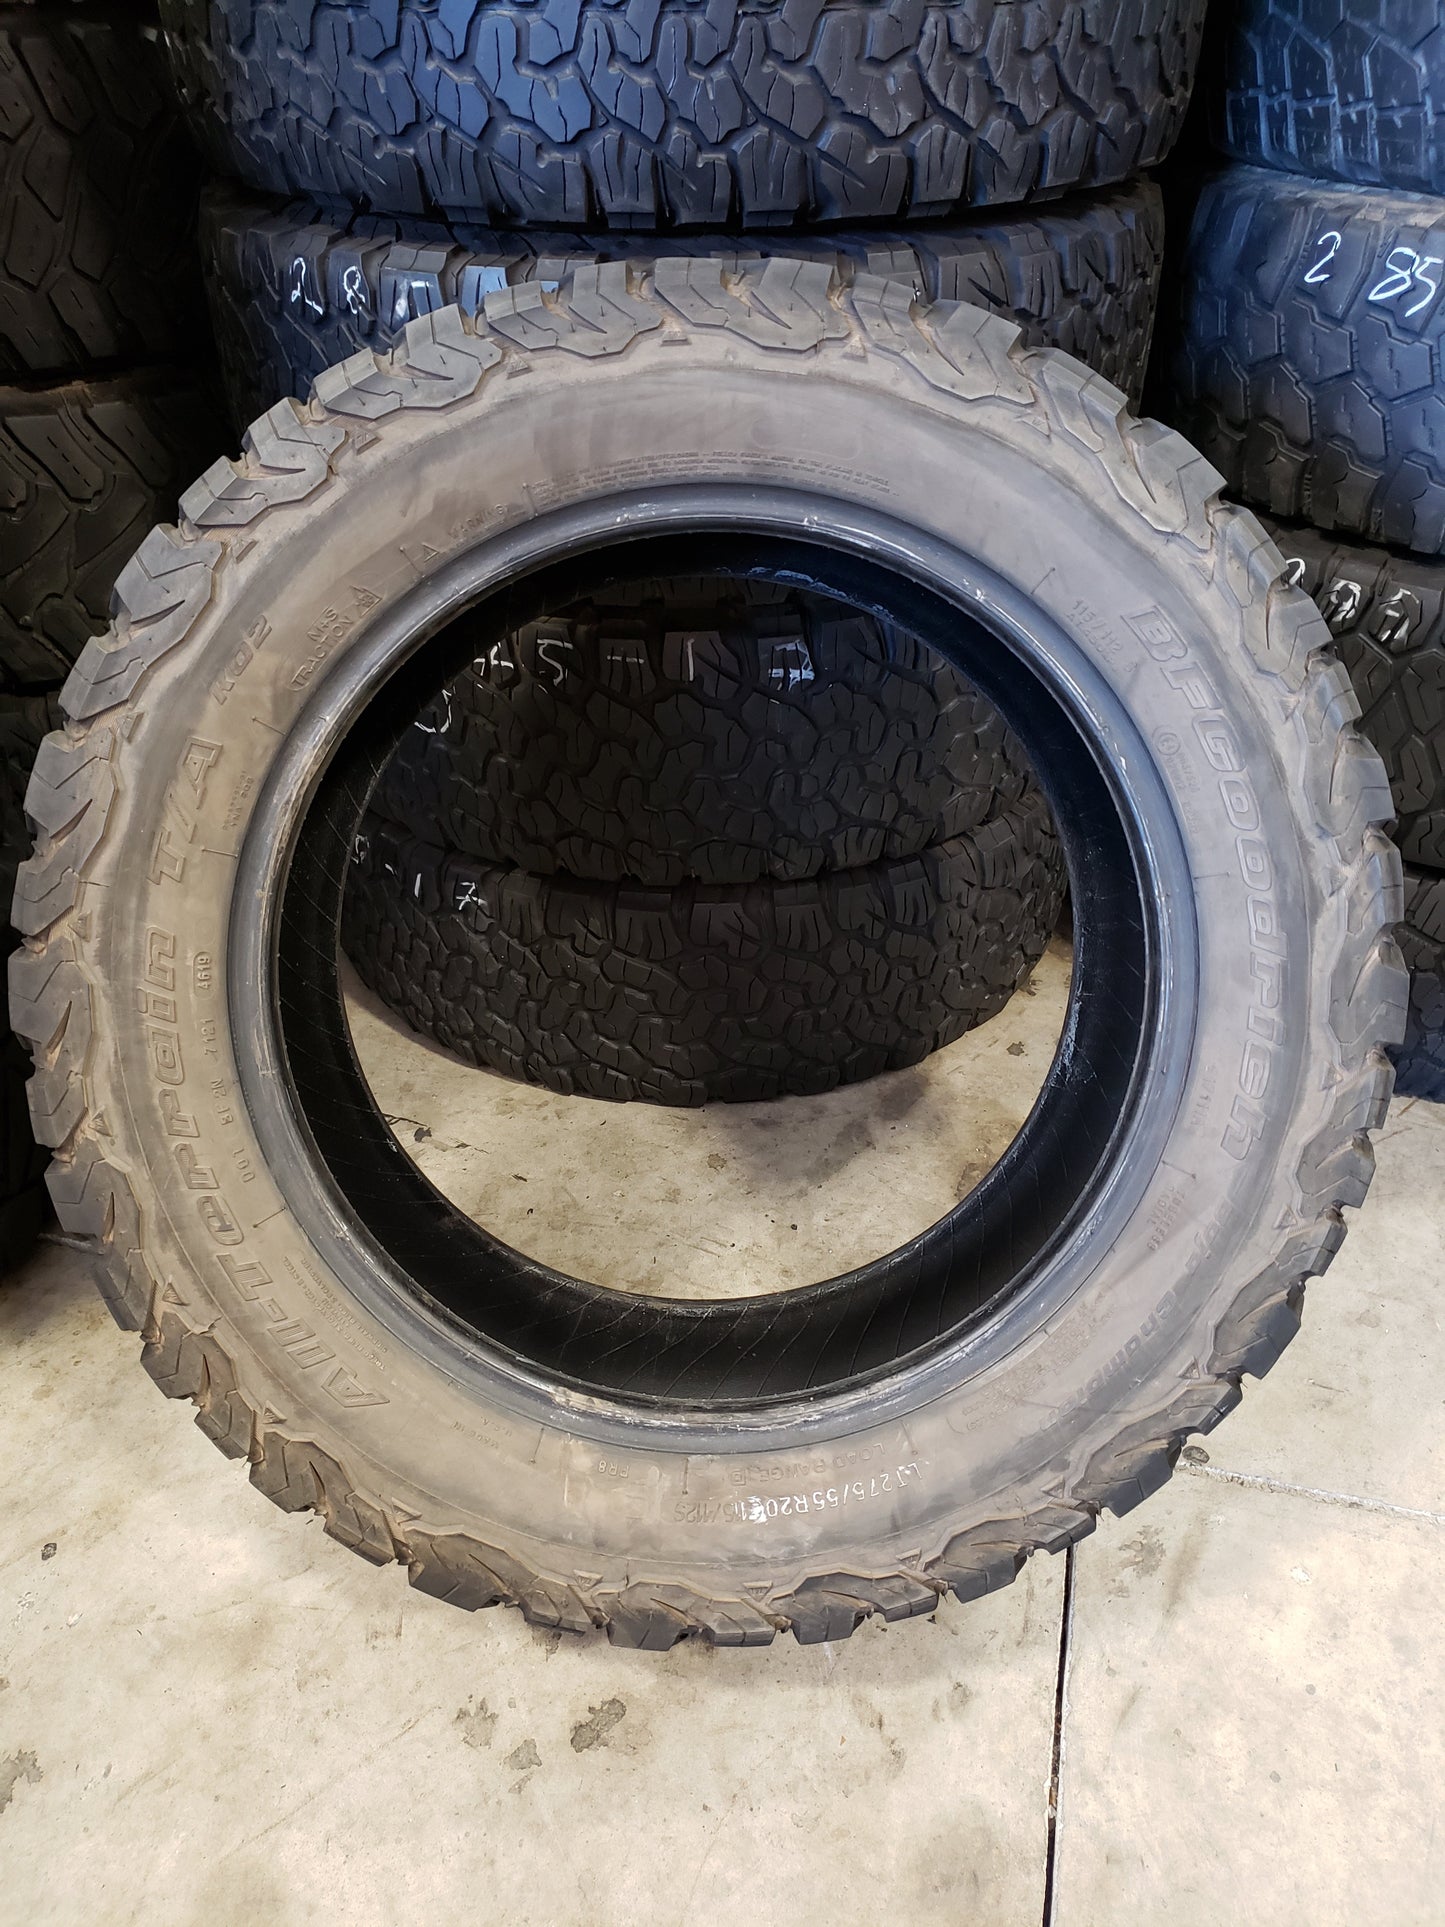 SET OF 2 275/55R20 BFGoodrich All-Terrain T/A K02 115/112 S D - Used Tires